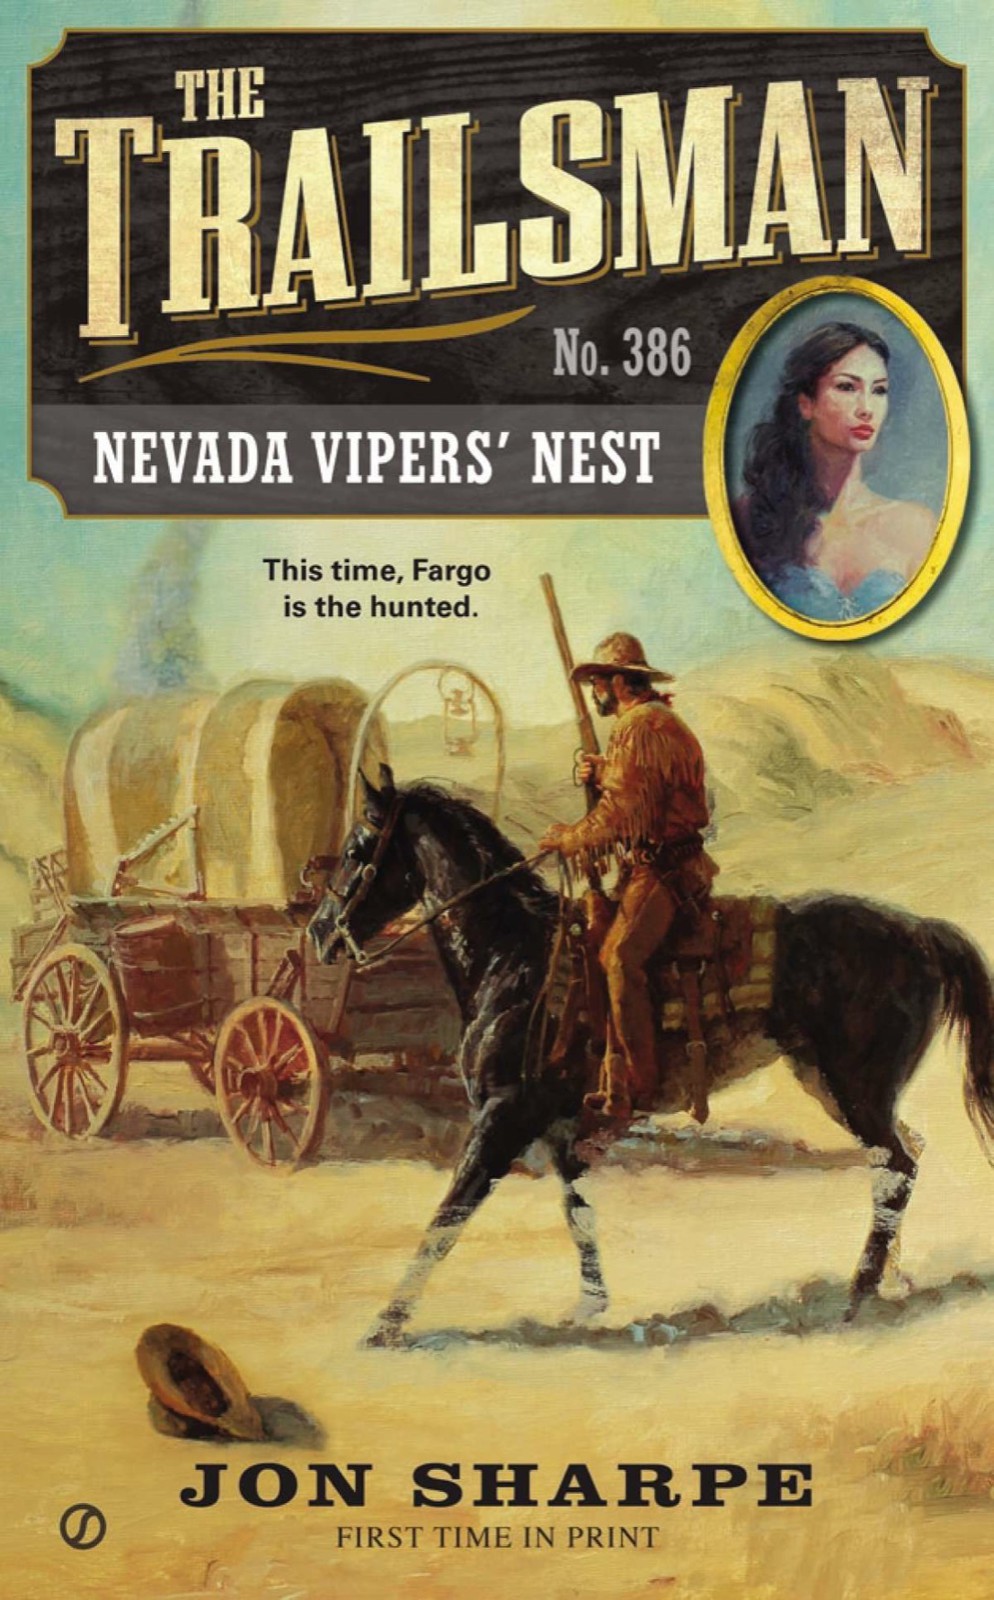 Nevada Vipers' Nest